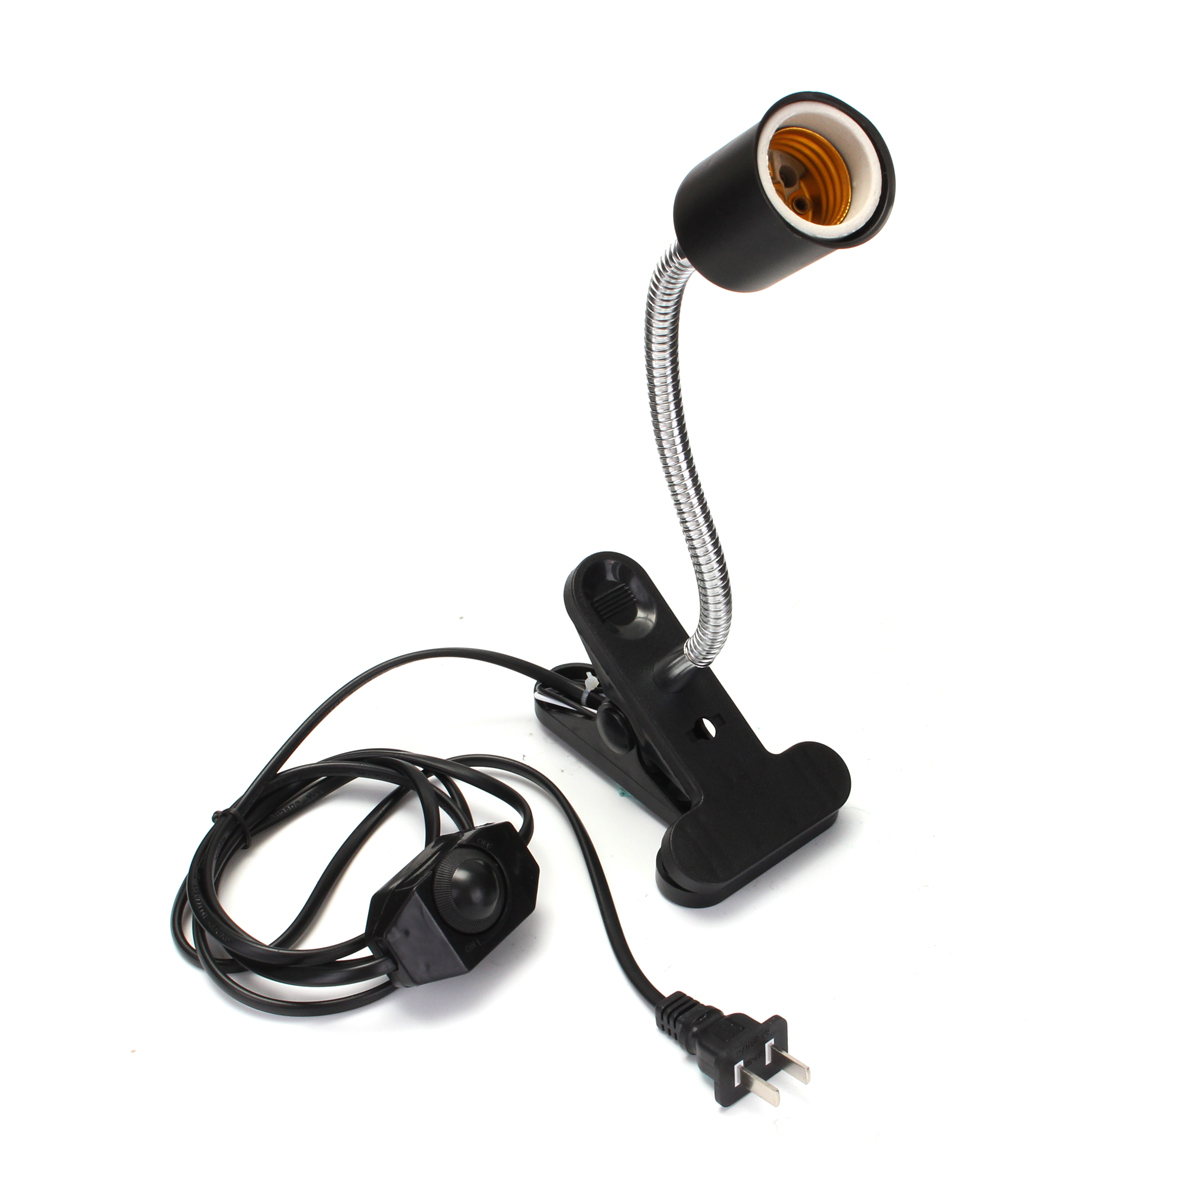 30CM-E27-Flexible-Pet-Heat-Light-Bulb-Adapter-Lamp-Holder-Socket-with-Clip-Dimming-Switch-1309671-2